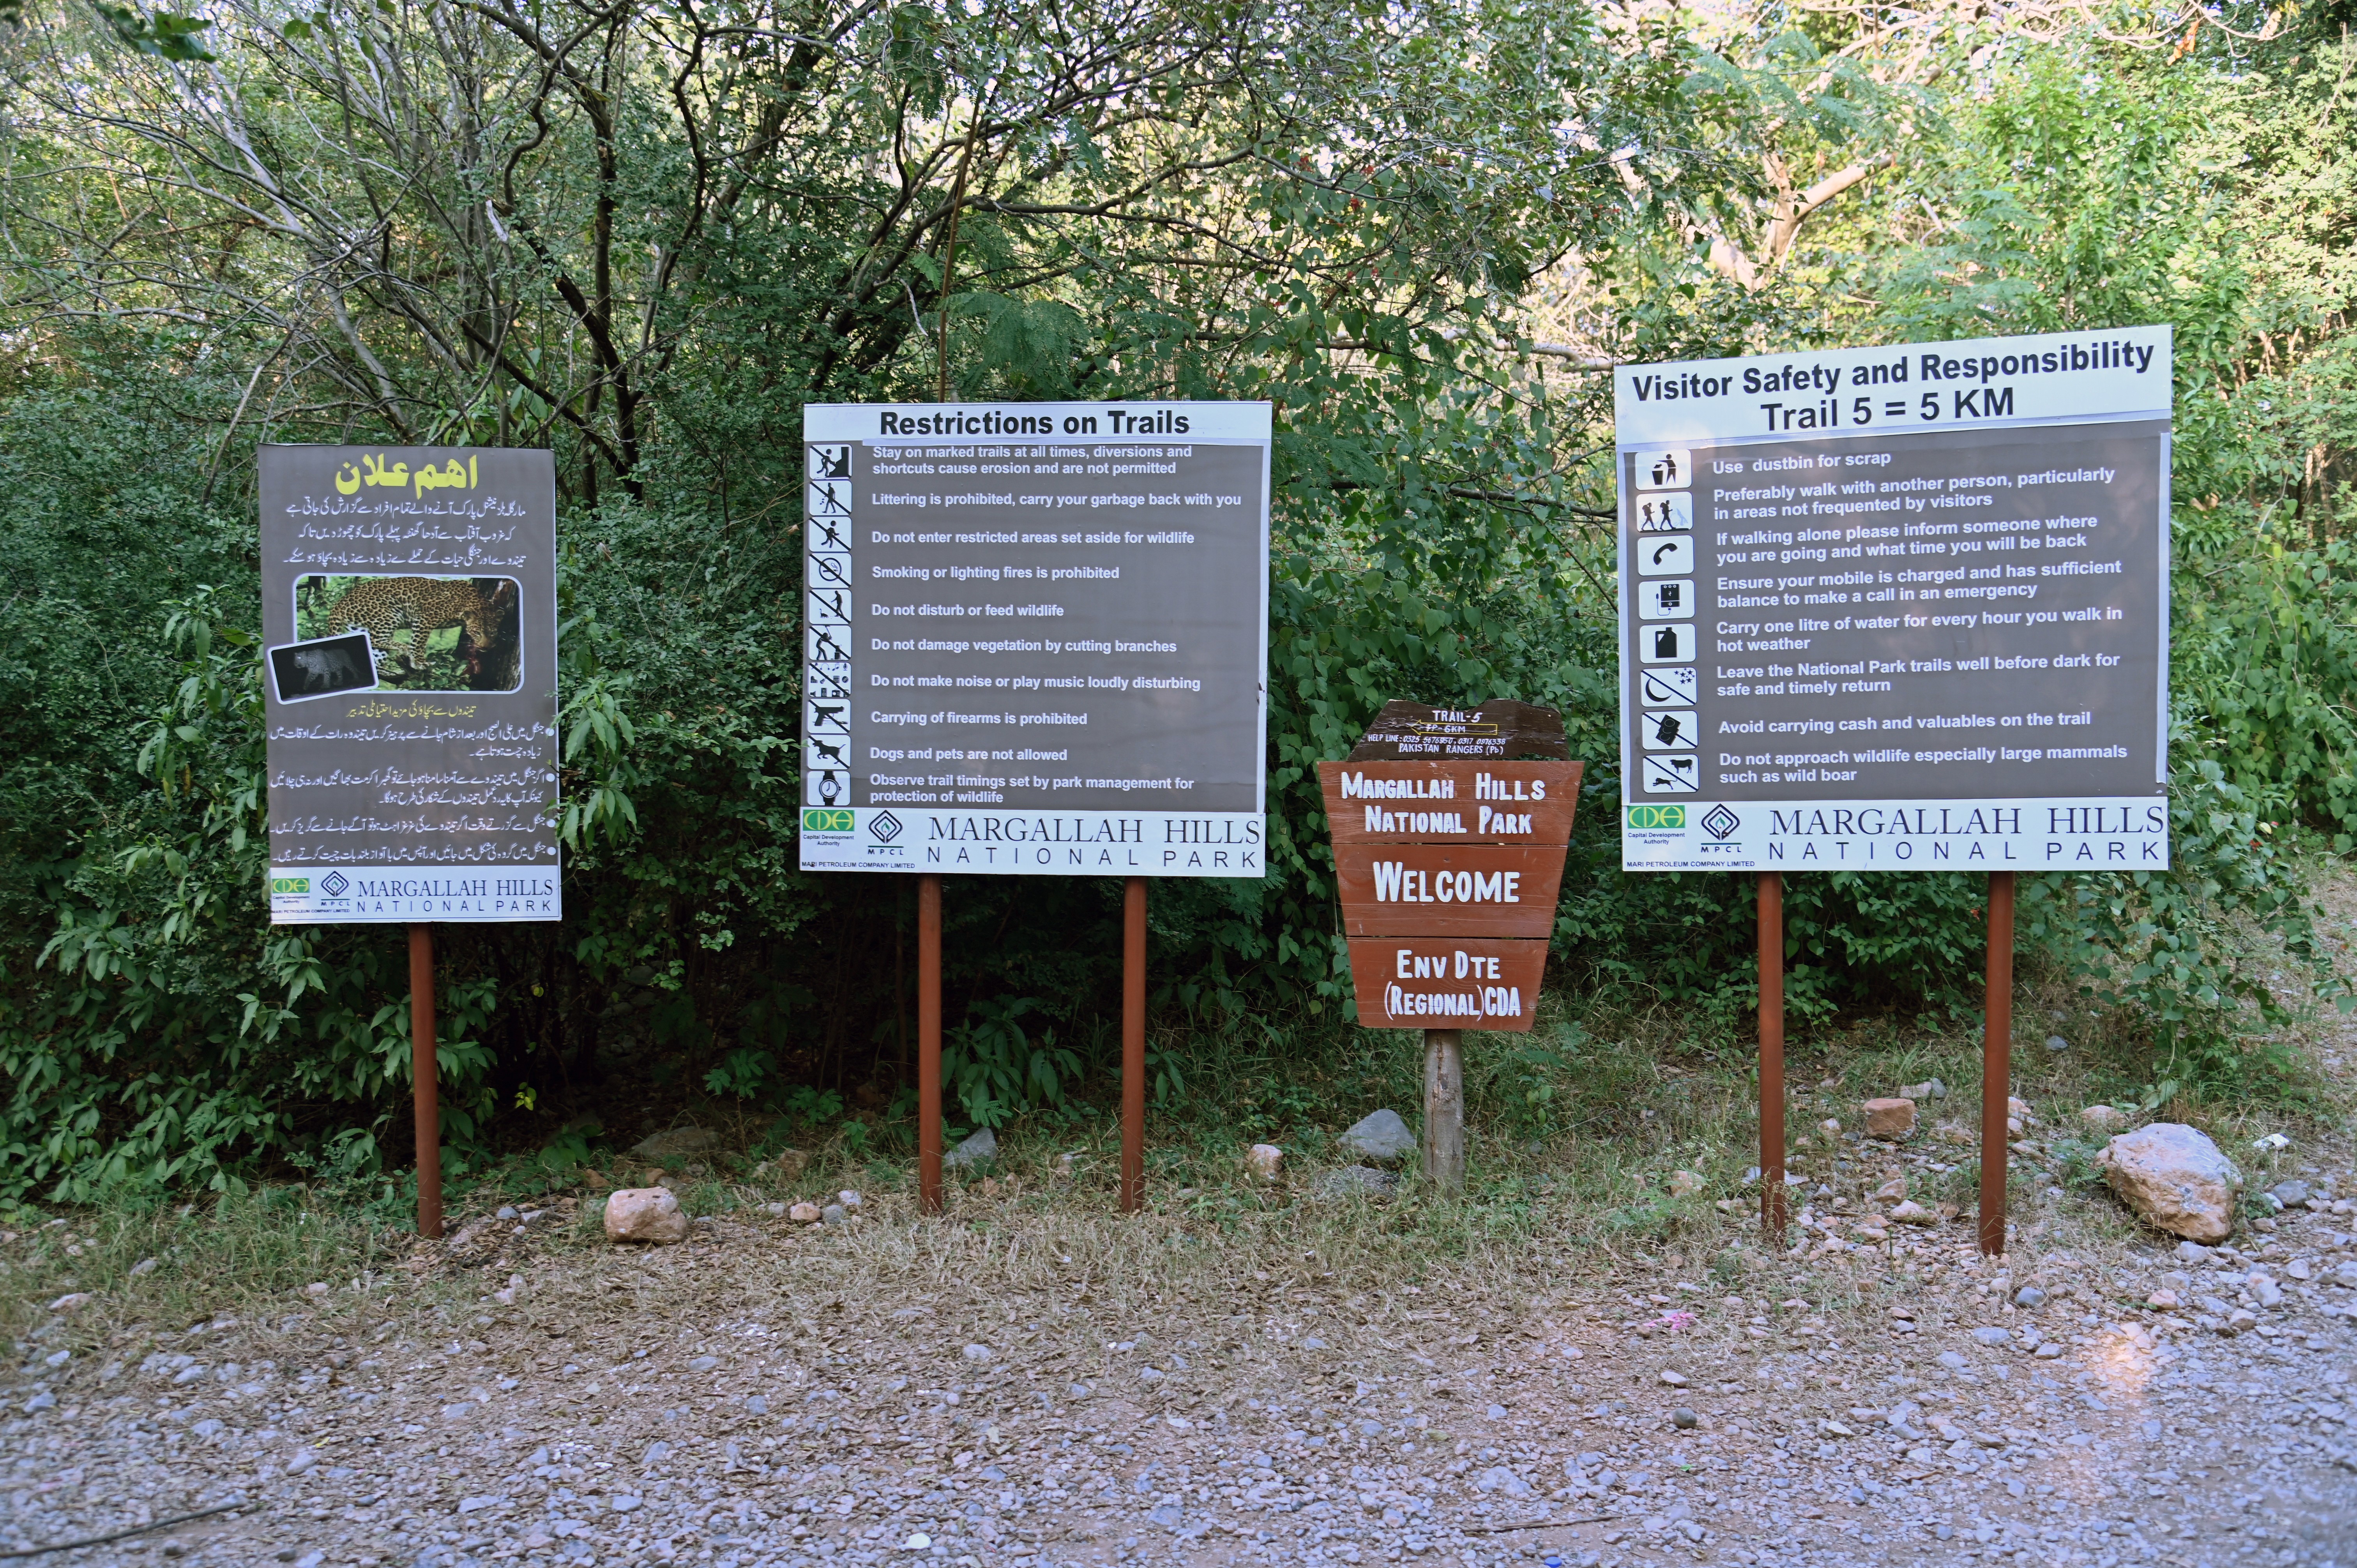 The board on Margalla Hill Trail-5 displaying the restrictions and safety measures for the visitors